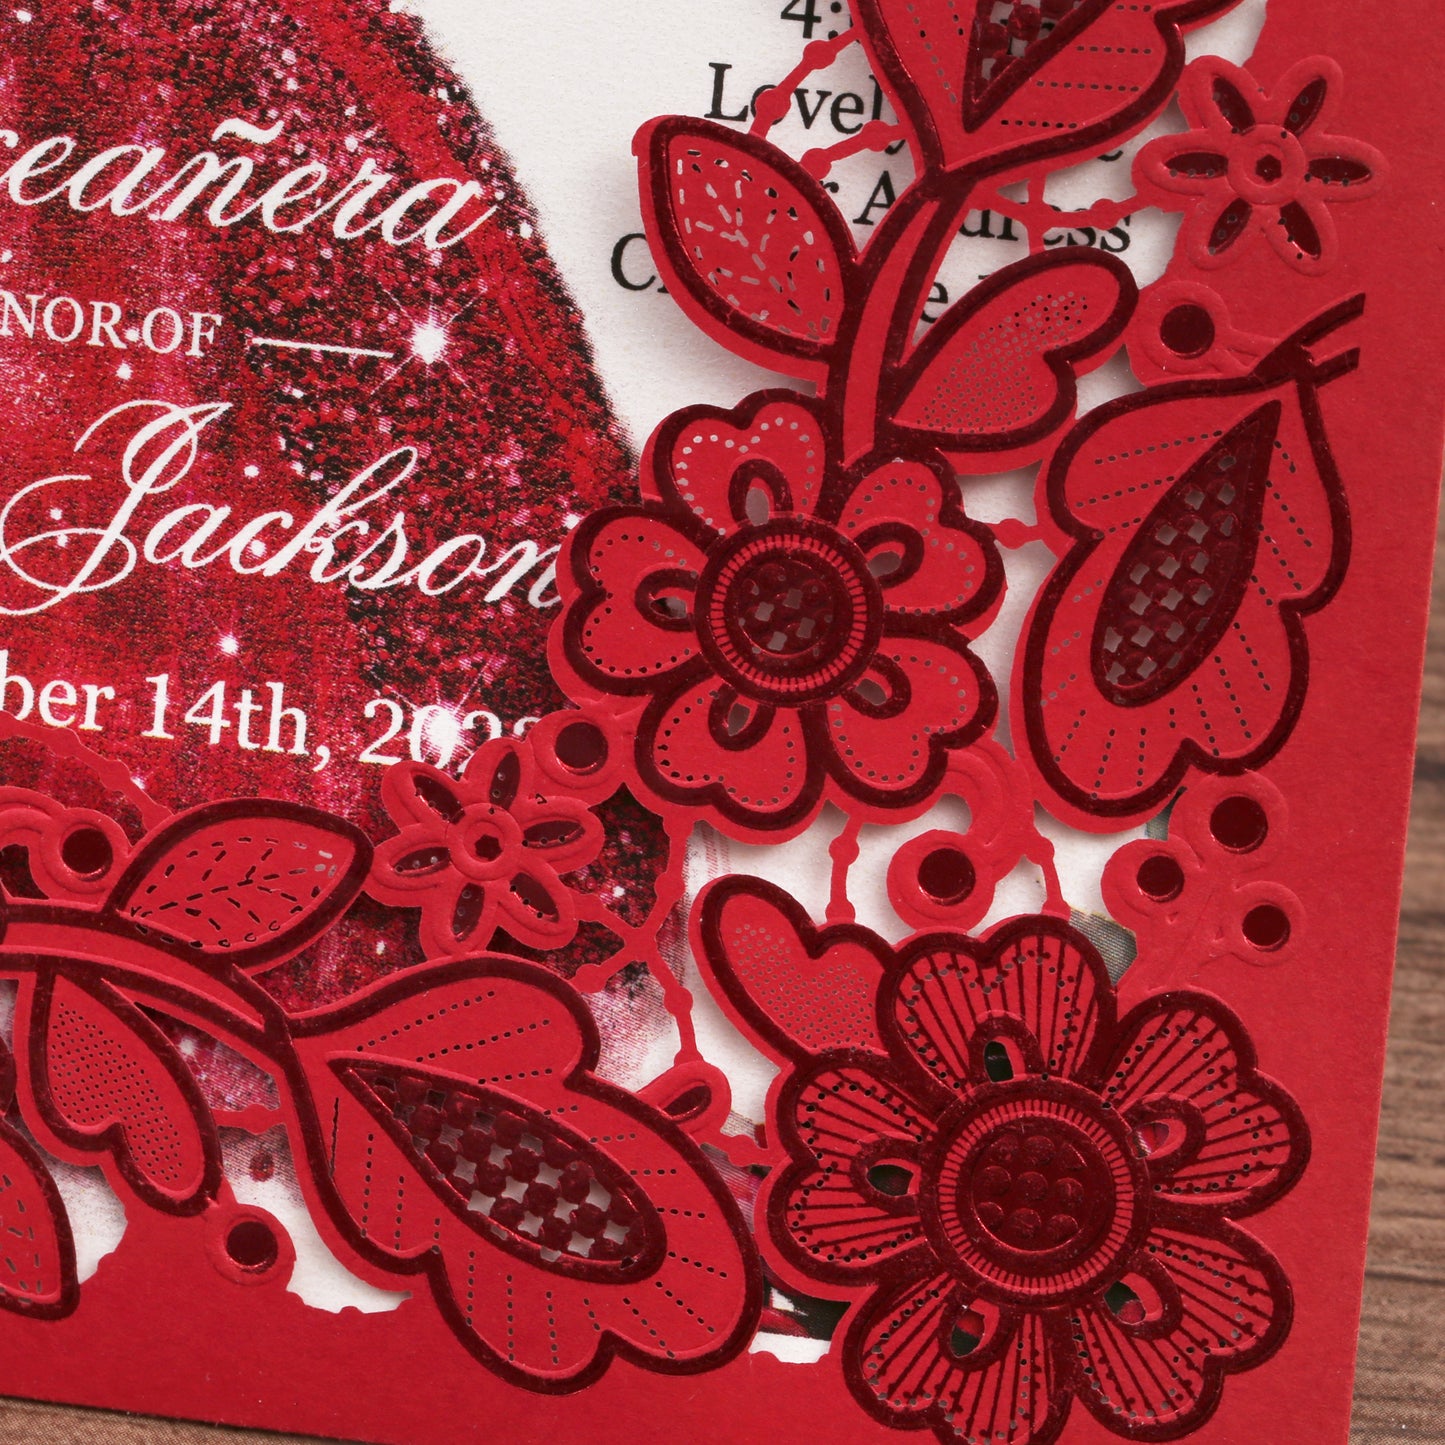 Customized Quinceanera Invitation Red, Elegant 15 years Invitations Sweet 16, Miss XV, Birthday Laser Cut Quince Invitation Cards Red Personalized